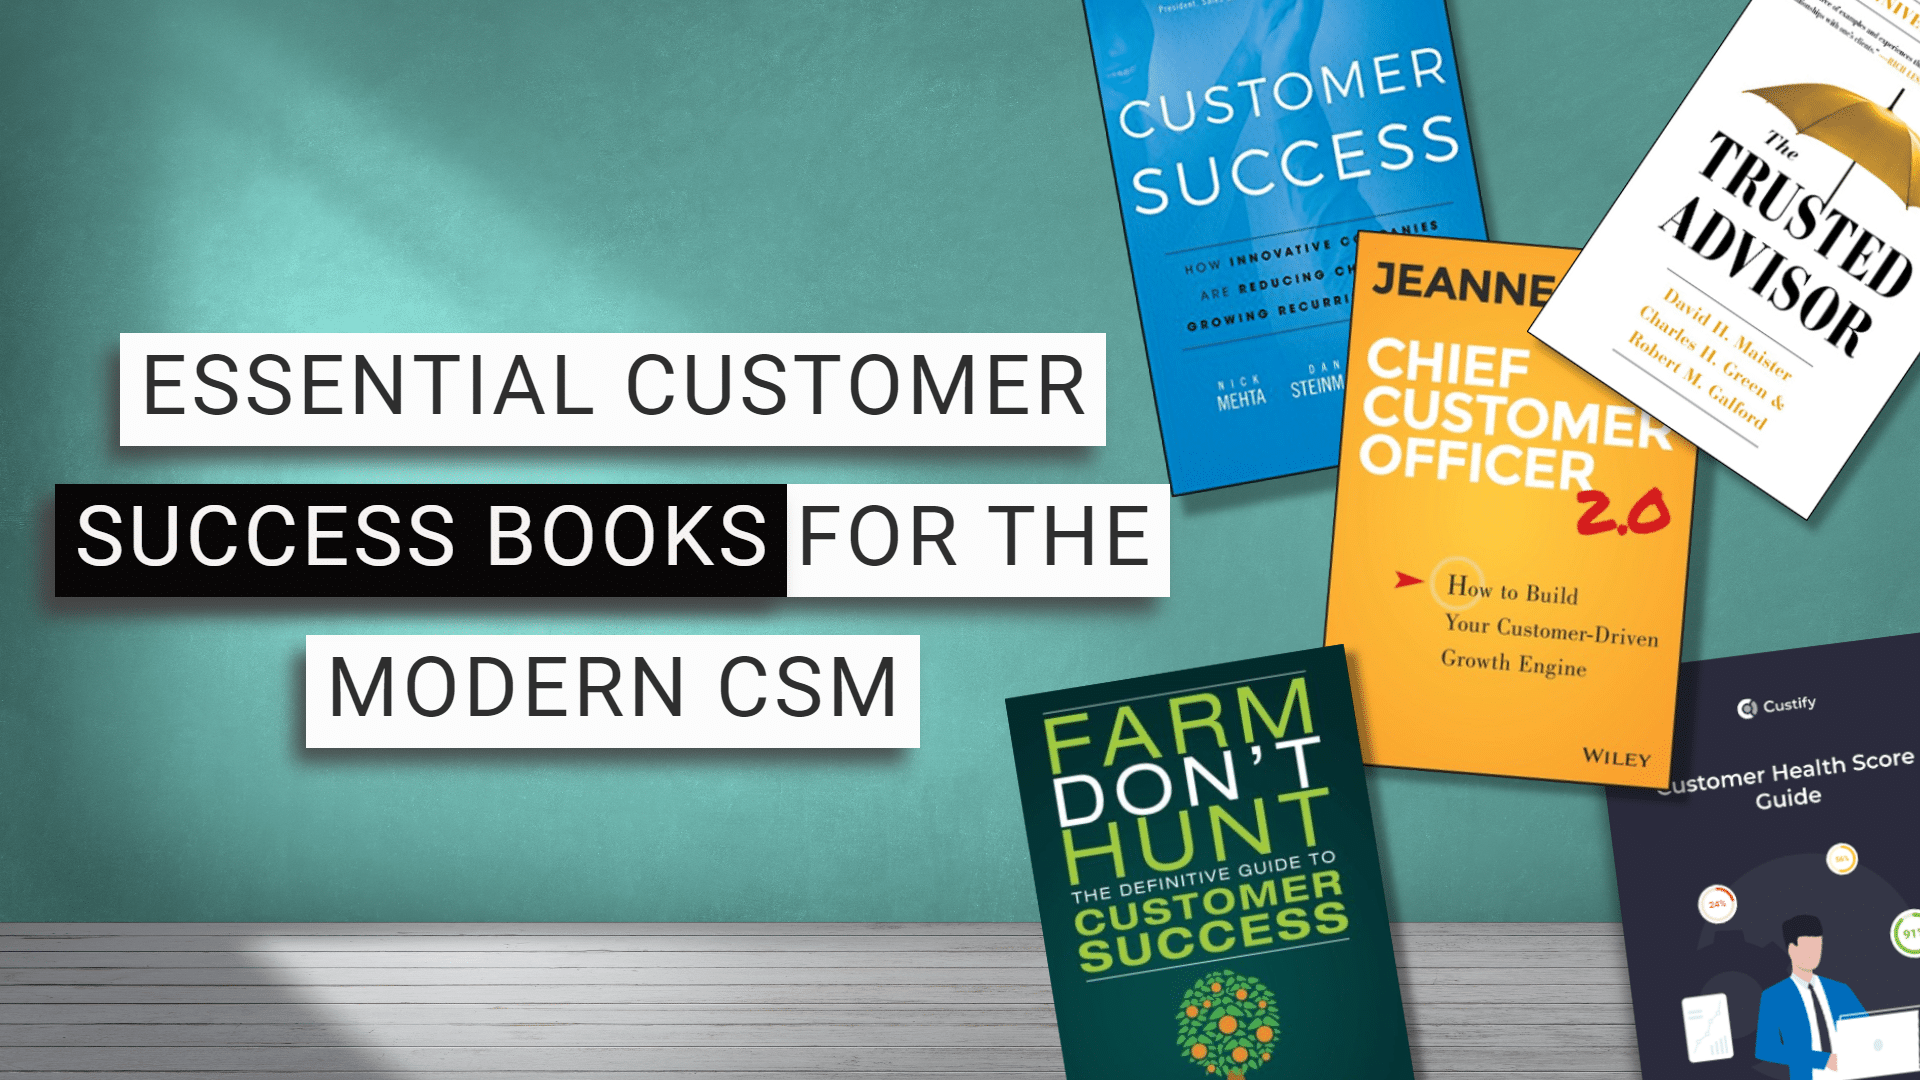 The 20 Essential Customer Success Books for the Modern CSM | 2022 Updated List